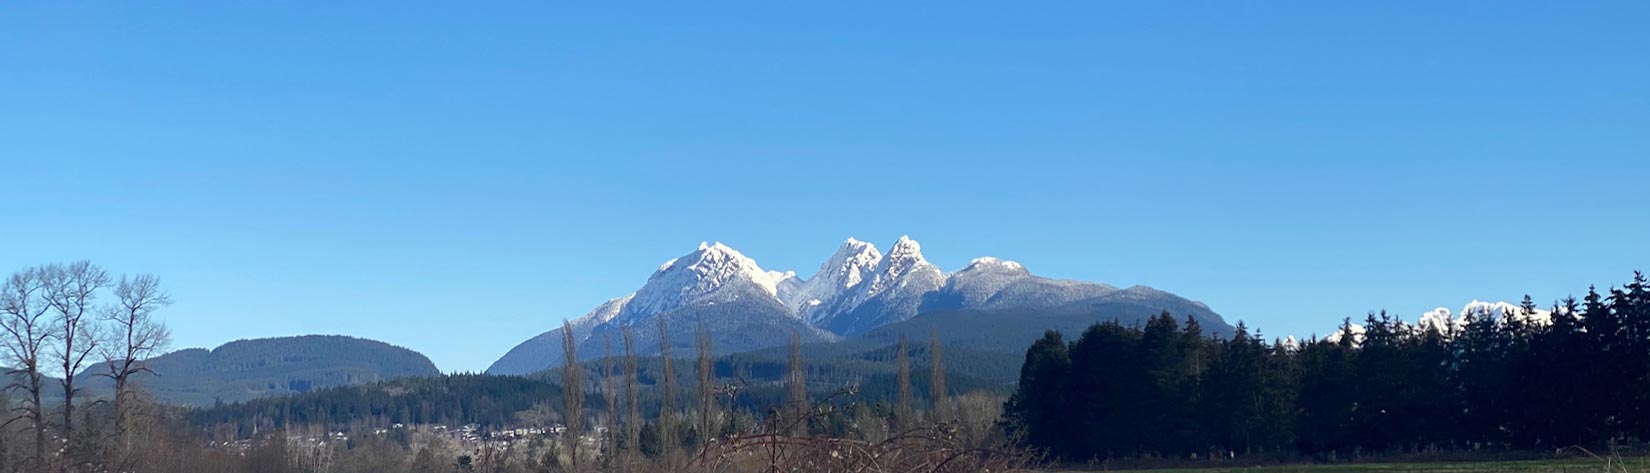 View of the mountain in Maple Ridge, BC.